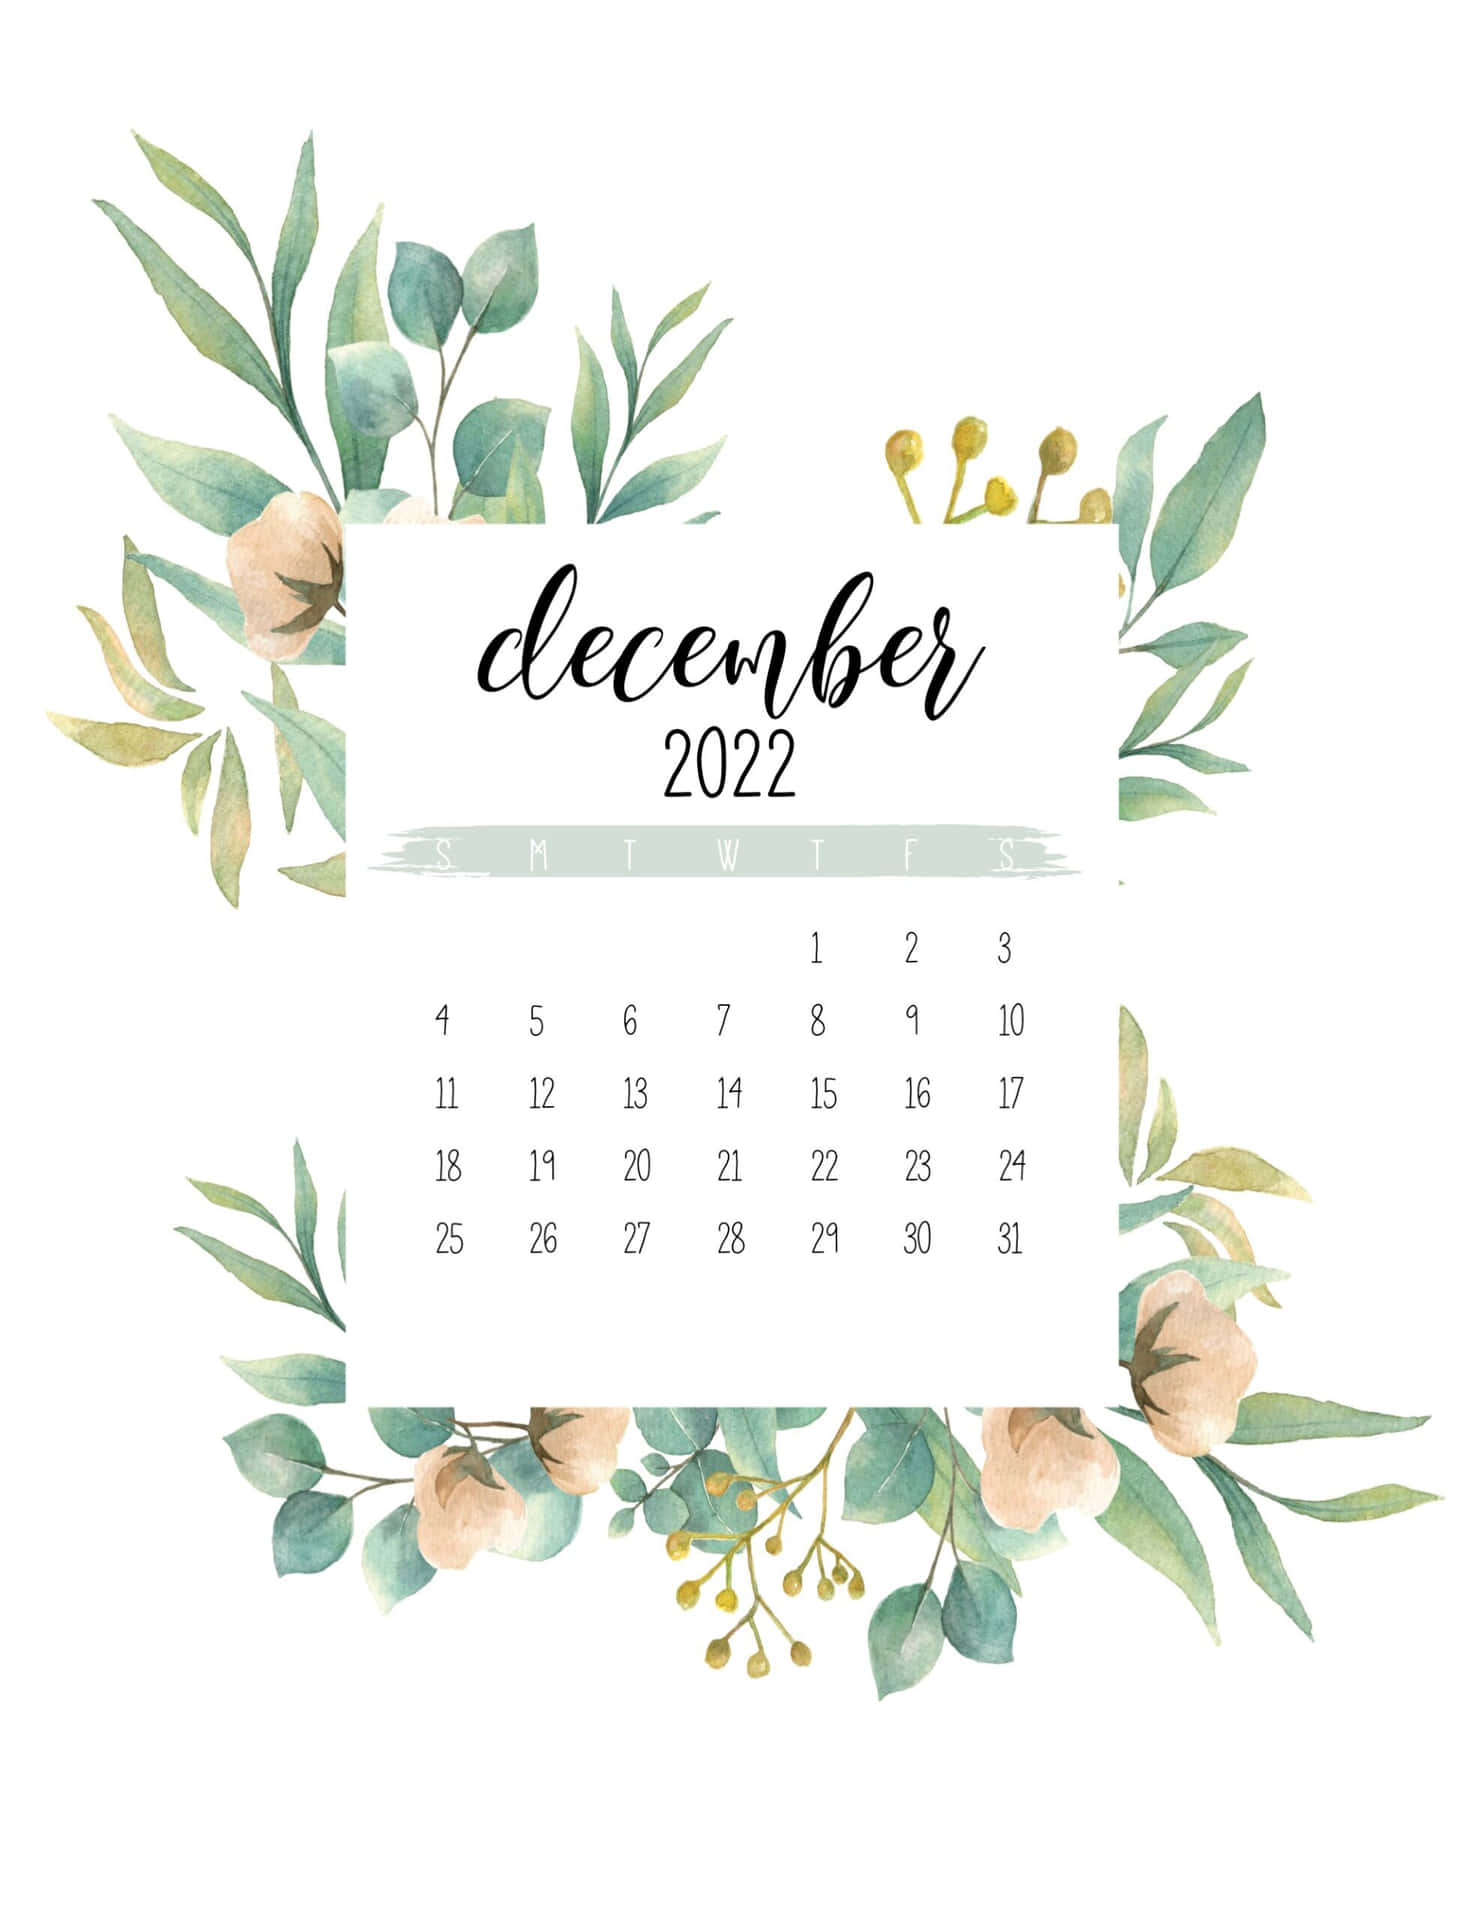 Gördecember Magisk Med Dina Små. (context: Encouraging People To Use A Special Wallpaper To Make The Month Of December More Festive And Enjoyable For Them And Their Children) Wallpaper